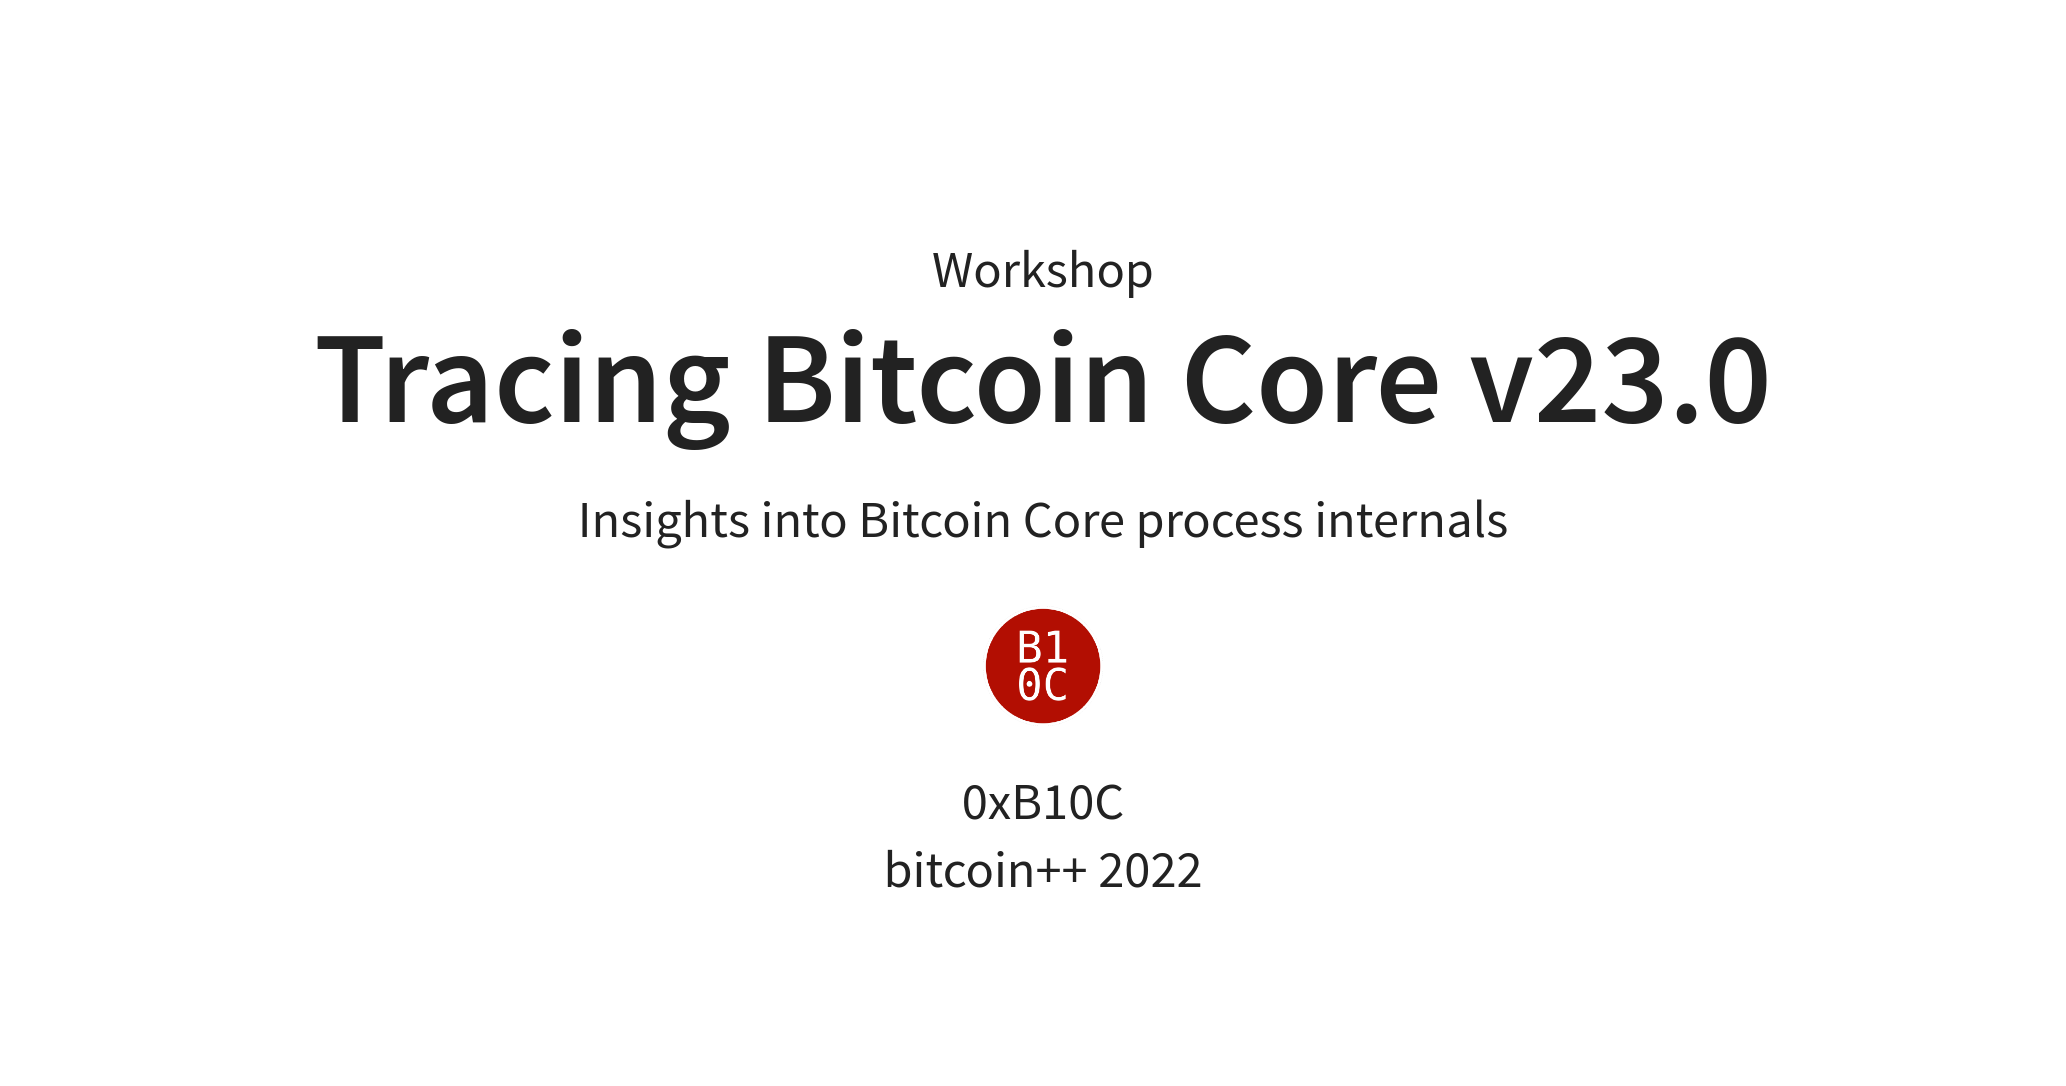 Image for bitcoin++ workshop: Tracing Bitcoin Core v23.0